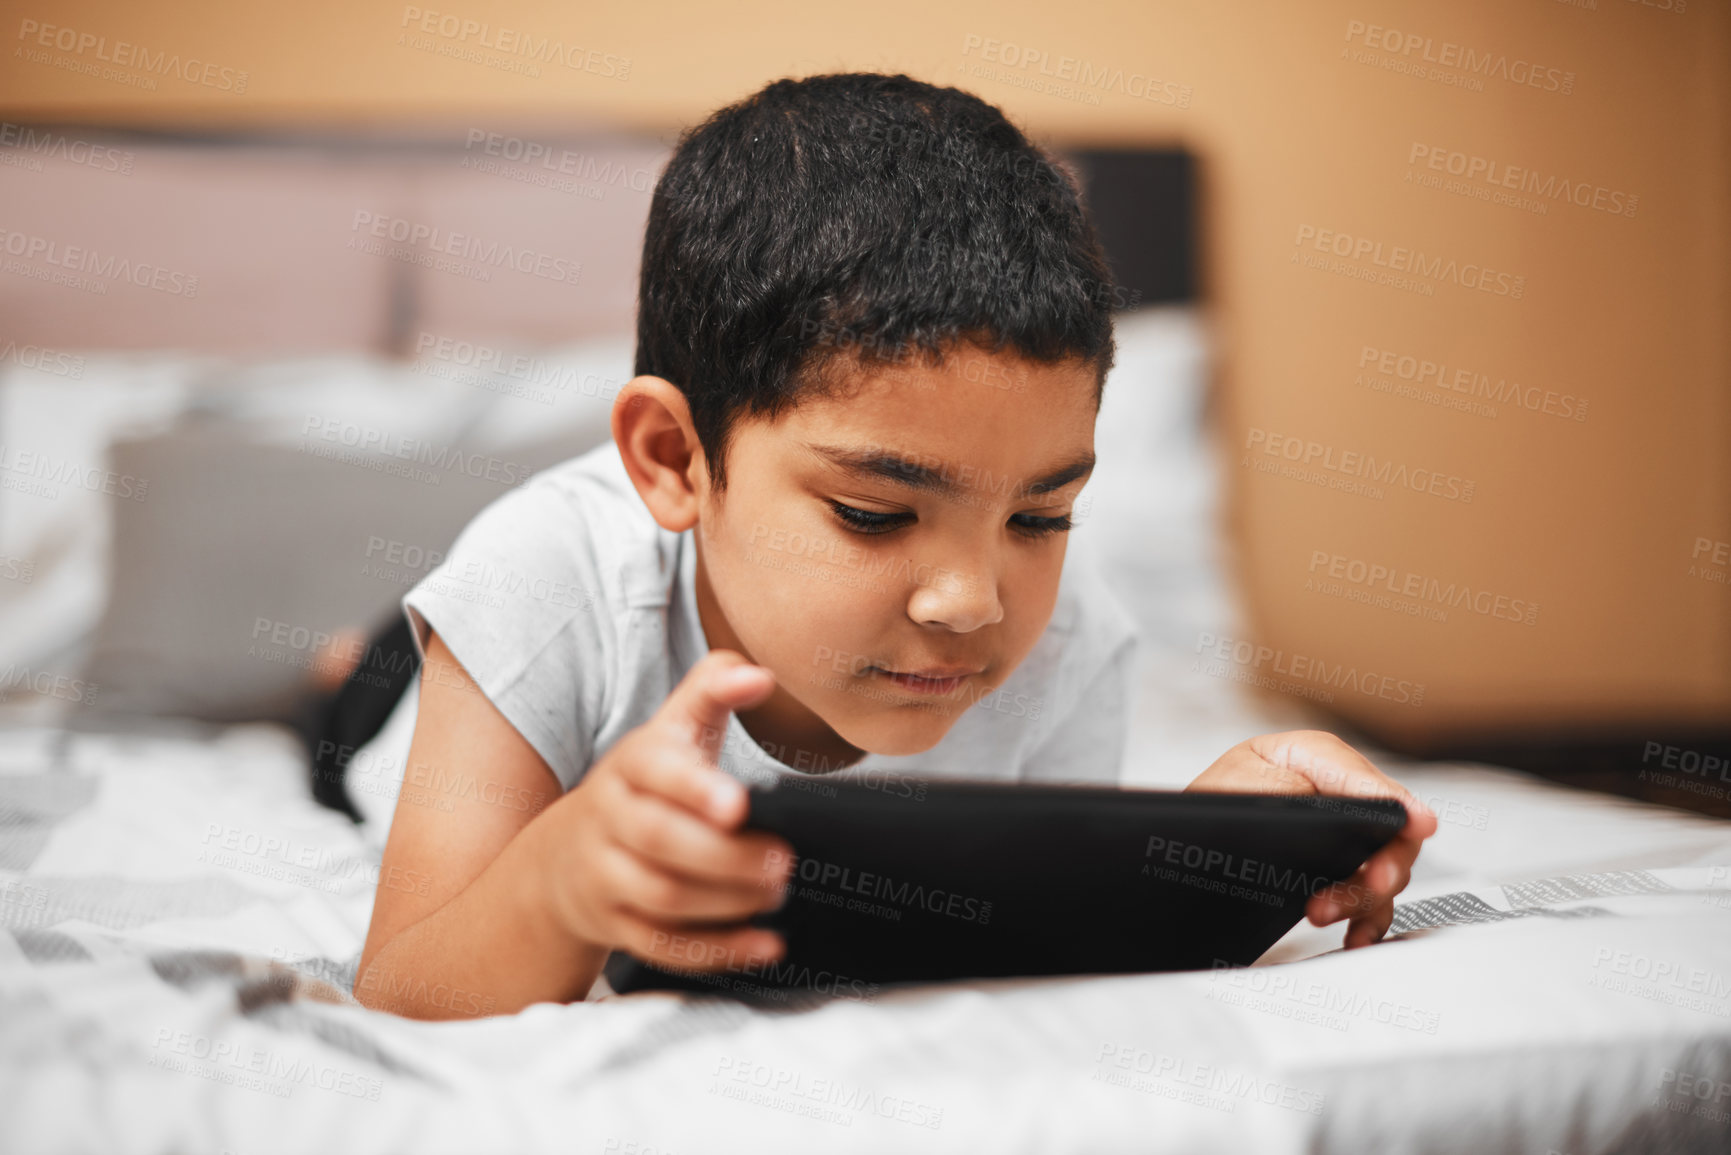 Buy stock photo Shot of an adorable little boy using a digital tablet in a bedroom at home